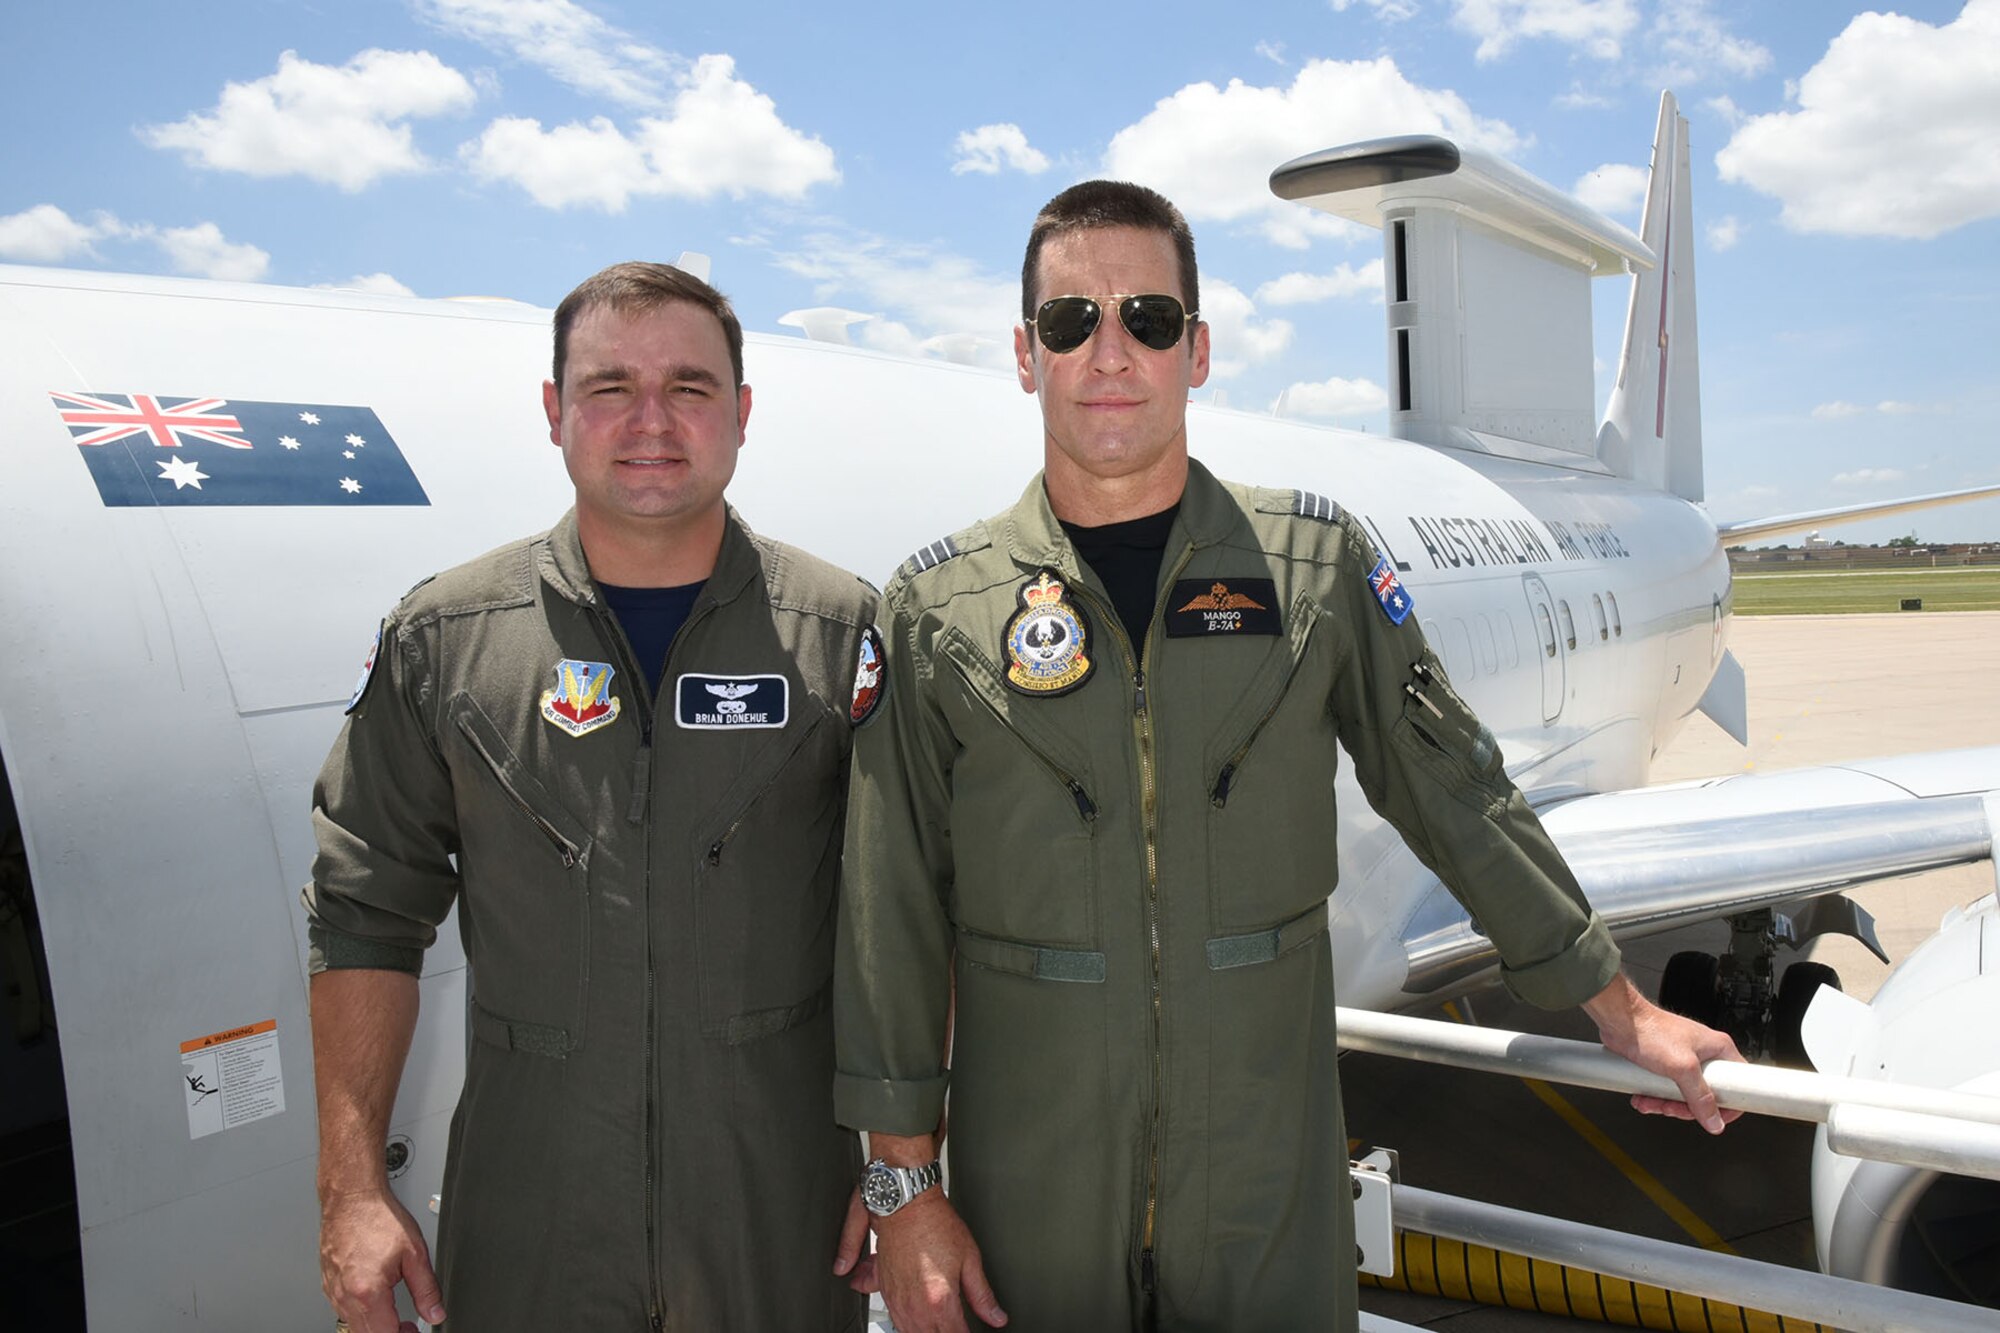 A crew from the Royal Australian Air Force flew one of their E-7A "Wedgetail" AEW&C (Airborne Early Warning and Control) aircraft into Tinker July 13. Wing Commander Mike "Mango" Bowen met with the 552nd Air Control Wing Director of Staff Lt. Col. Brian Donehue to discuss with reporters their new exchange program between the two wings.